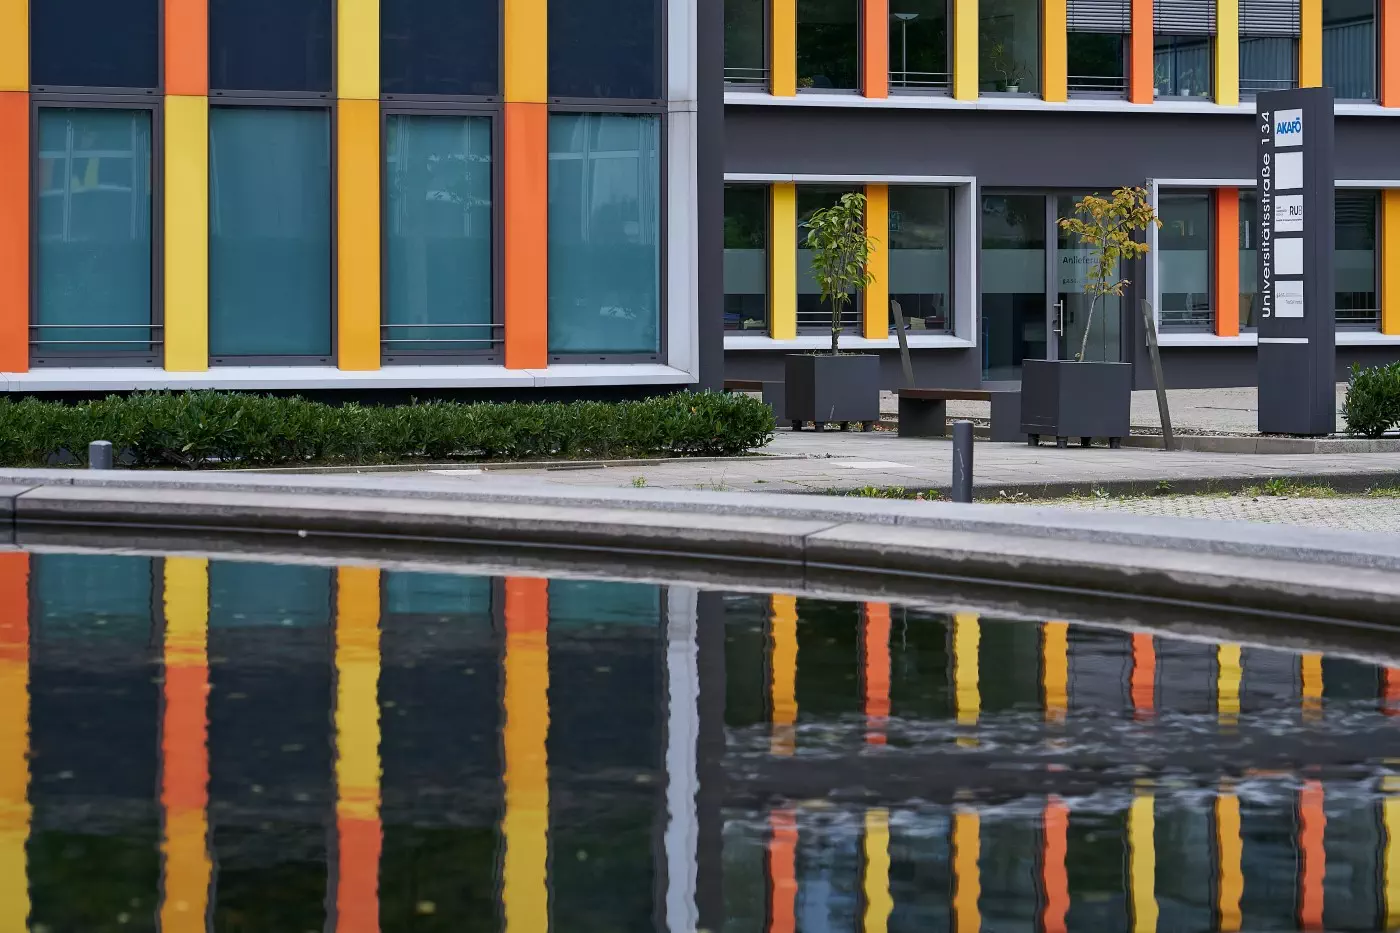 An office building with vertical color stripes in yellow, orange and red hues that is reflected in a pond in front of it.